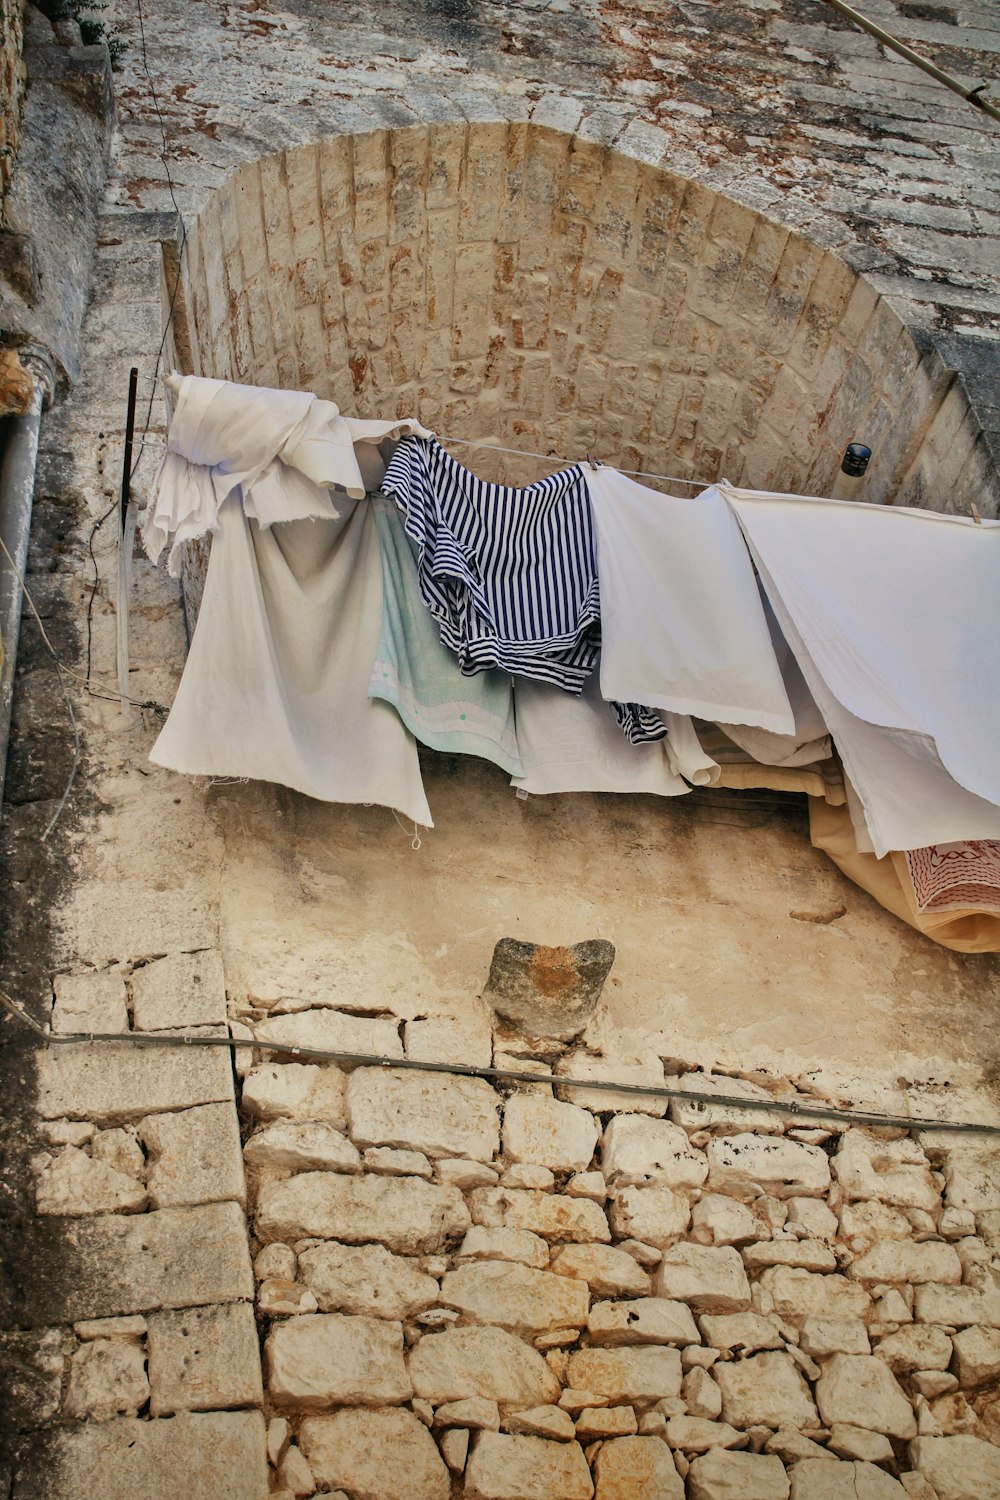 clothes hanging out to dry on a clothes line